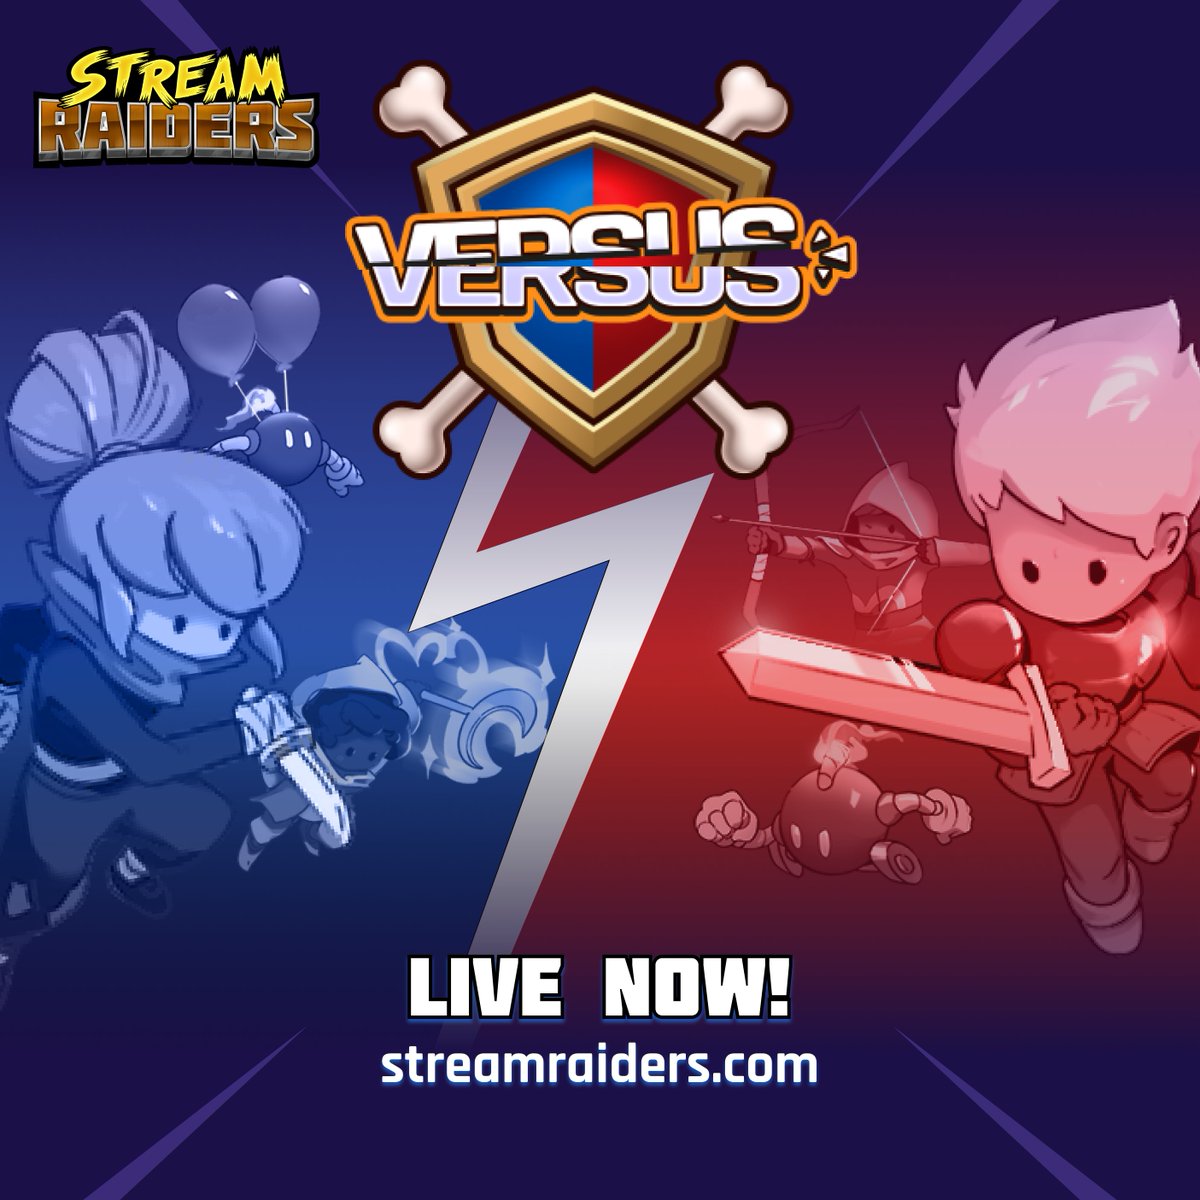 ⚔️⚔️⚔️ Versus Clash is now LIVE! ⚔️⚔️⚔️ Play all weekend to battle other communities, earn bones, and unlock cool skins! streamraiders.com